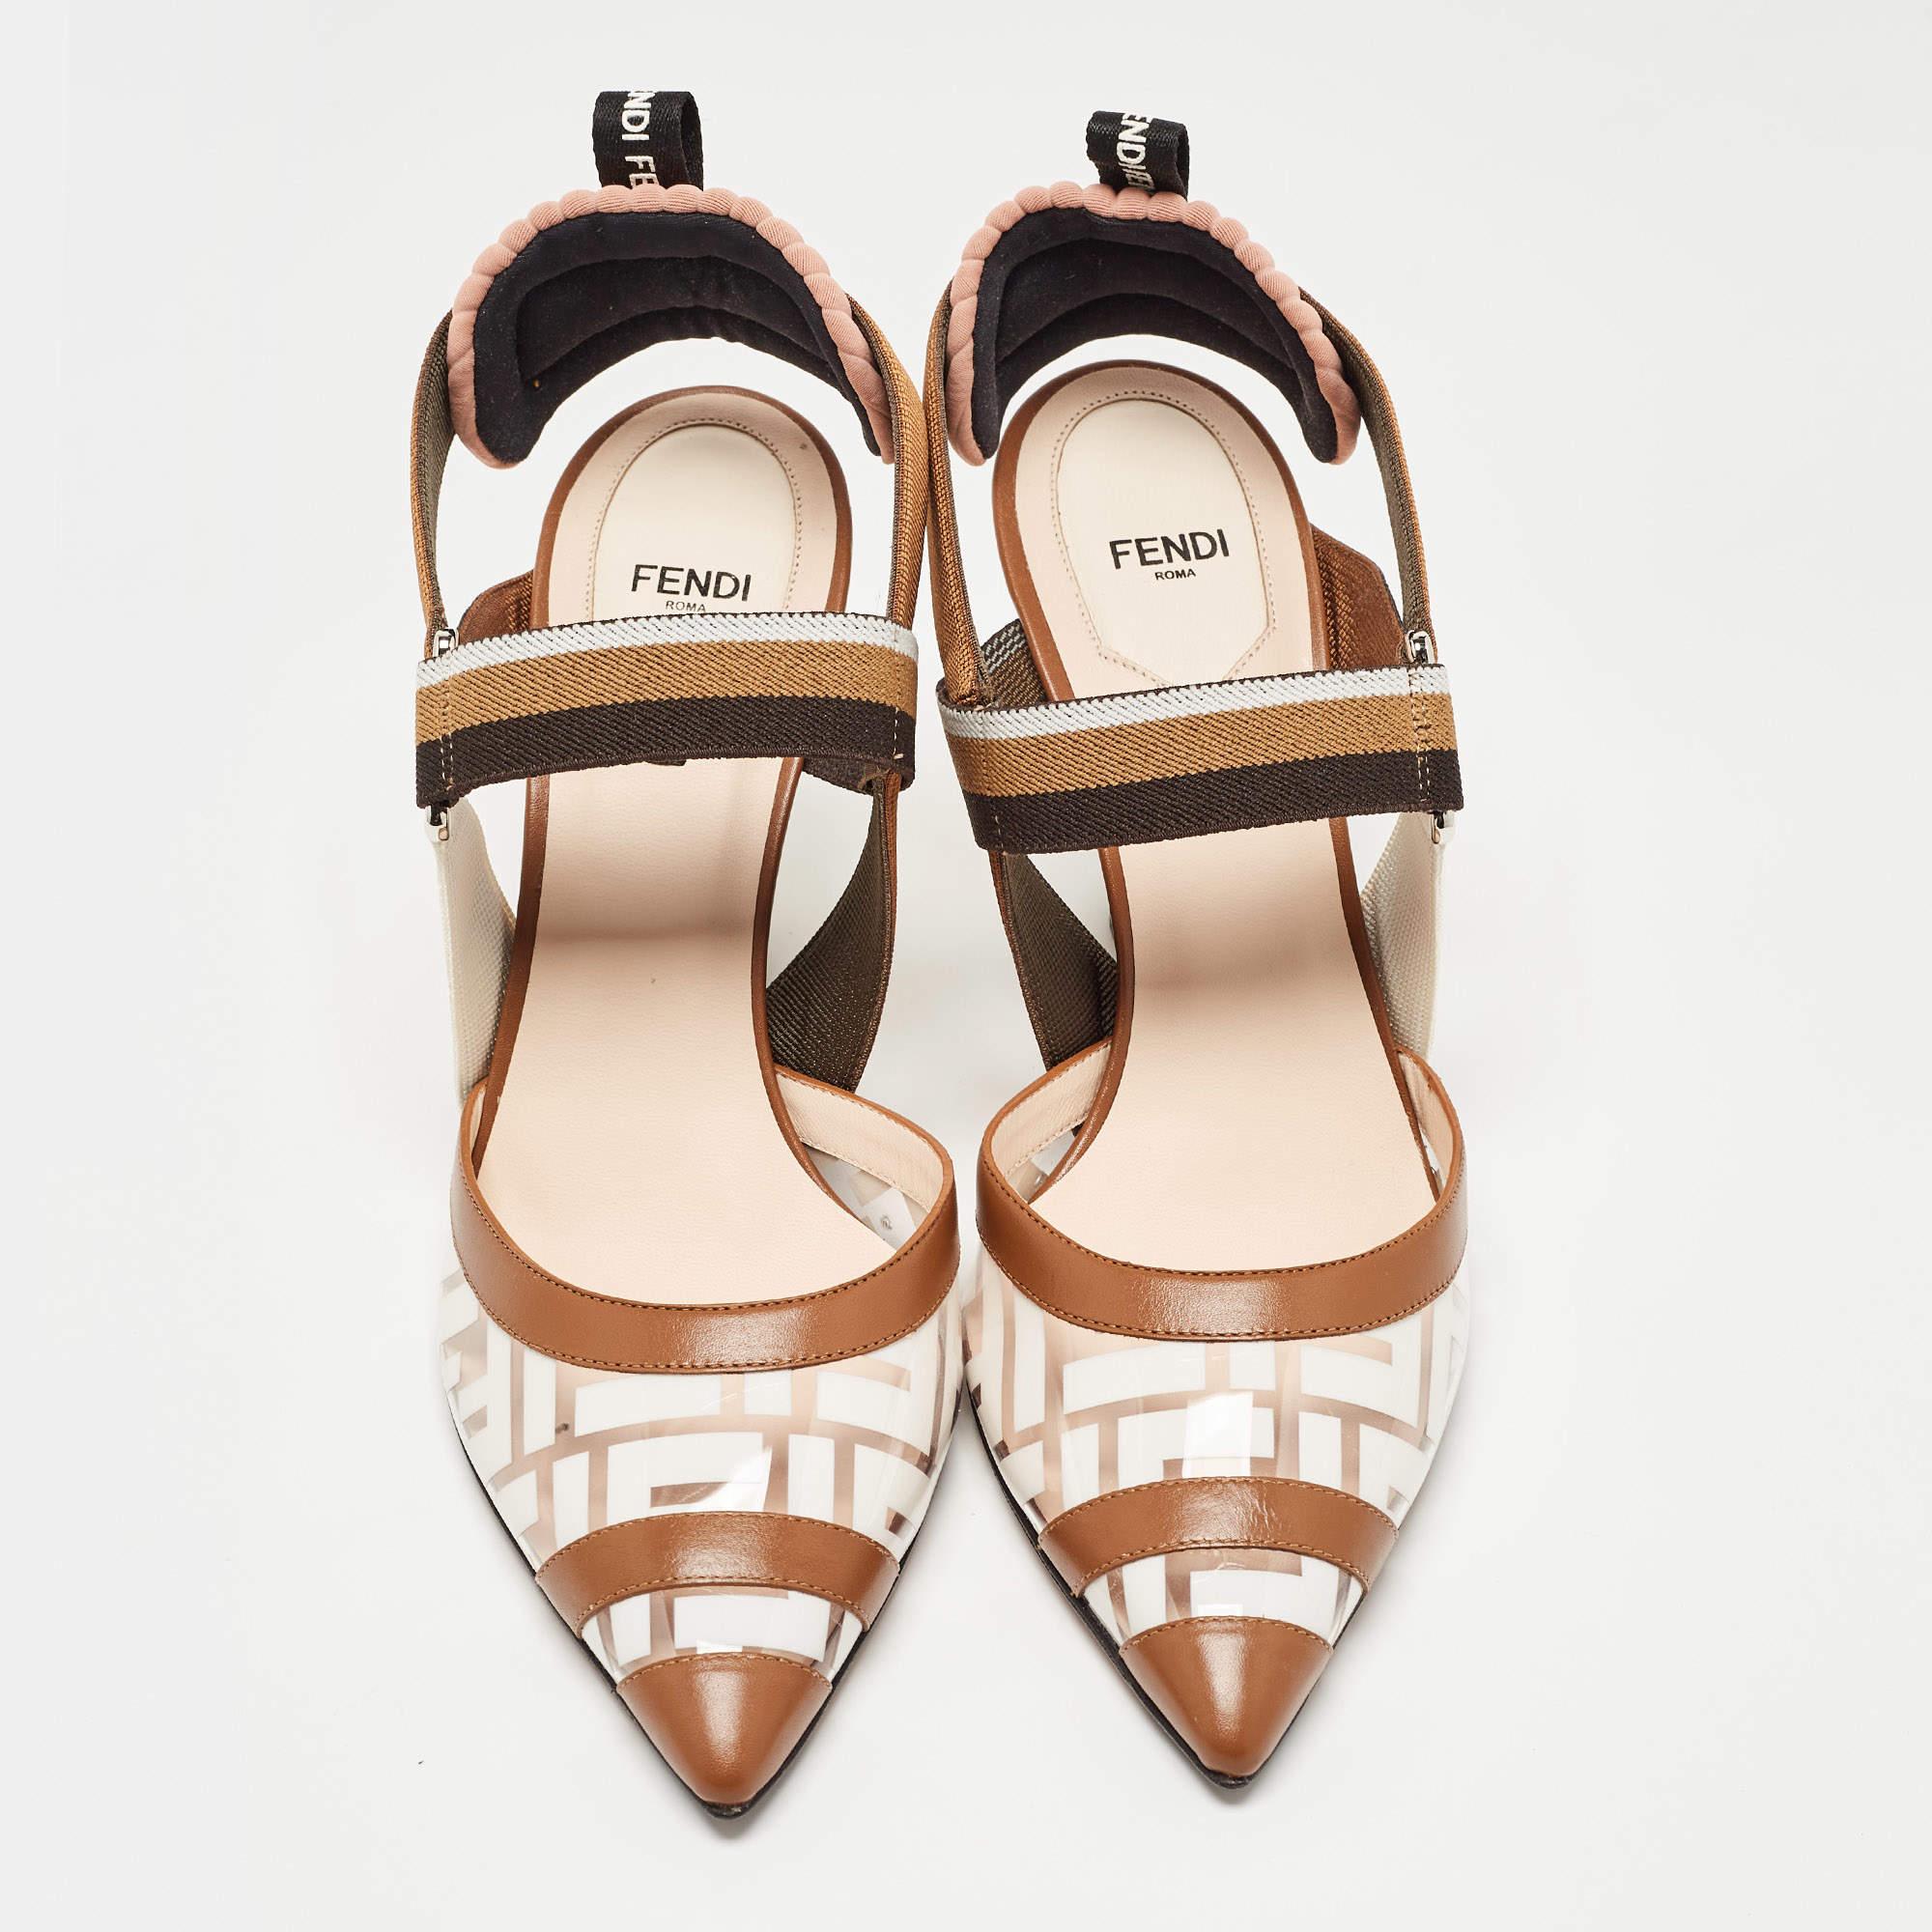 Wonderfully crafted shoes added with notable elements to fit well and pair perfectly with all your plans. Make these Fendi slingback pumps yours today!

Includes
Original Box